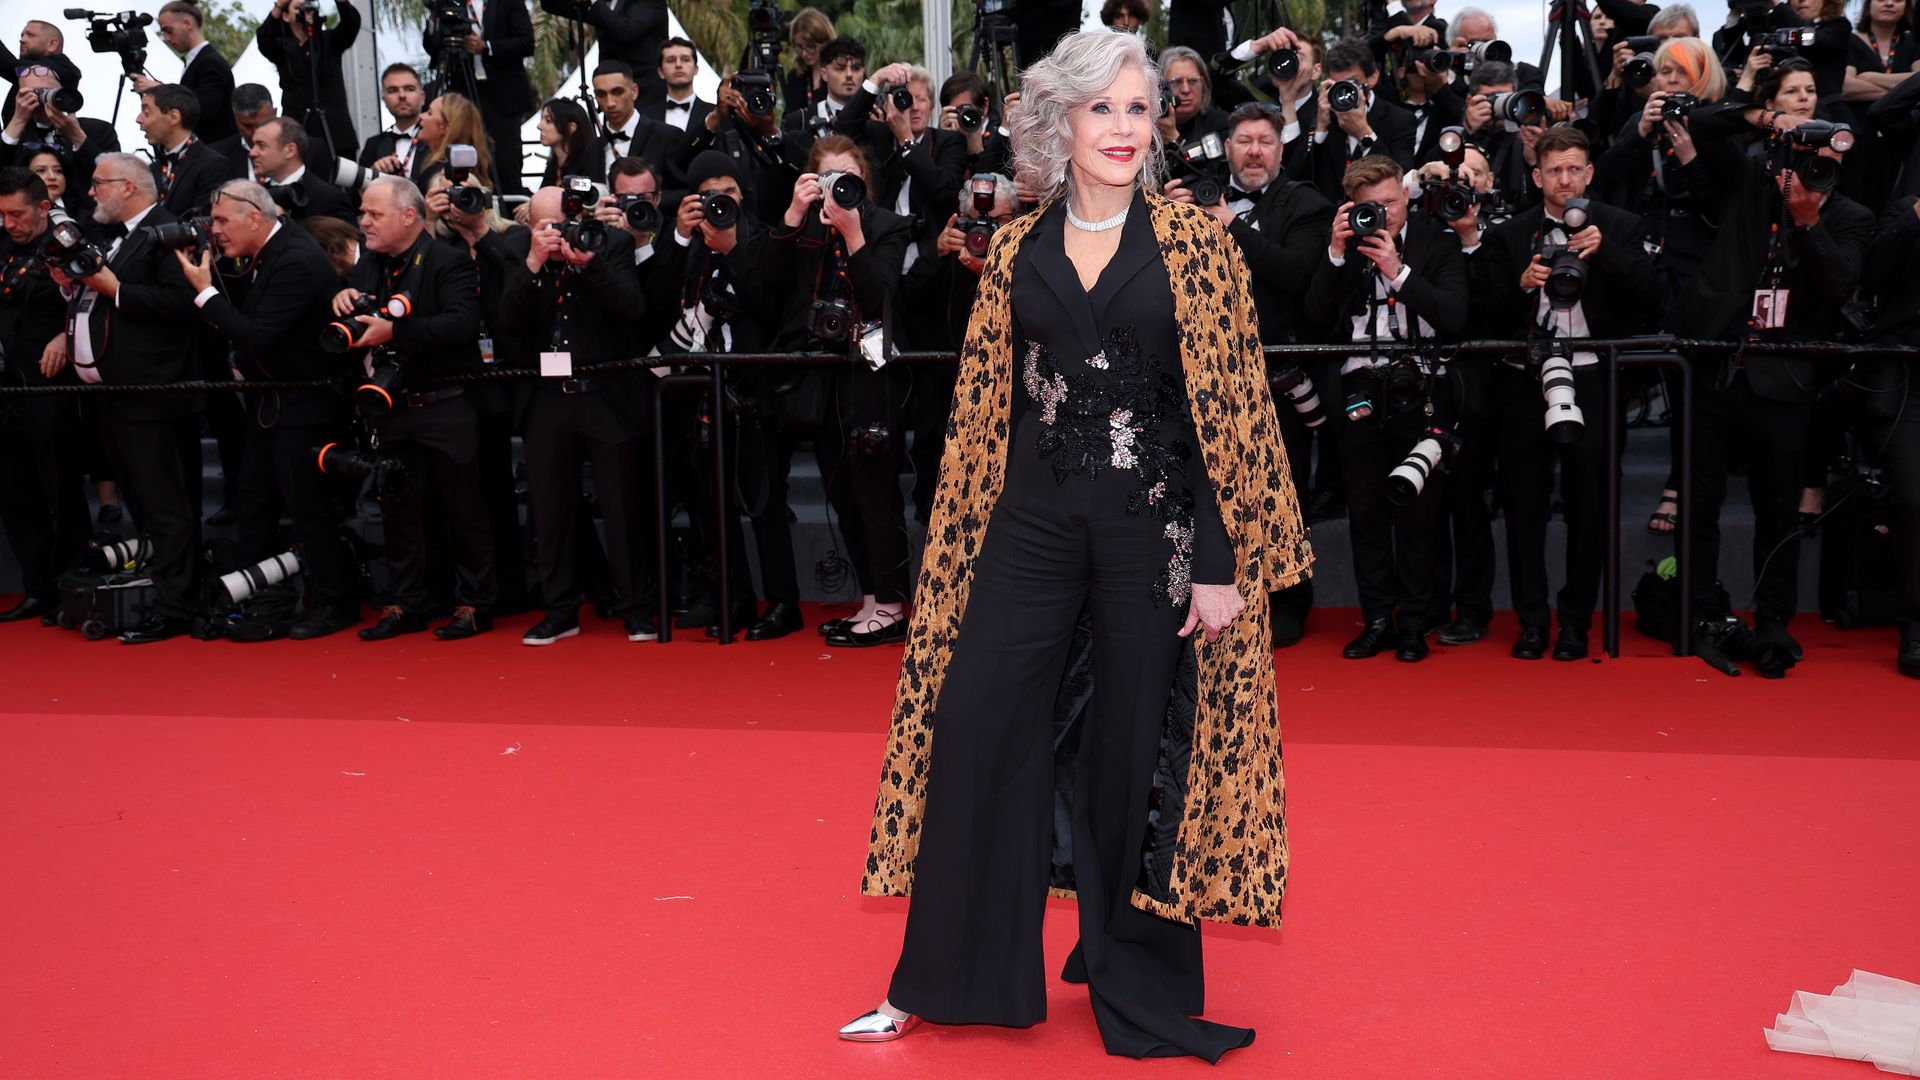 Jane Fonda at the opening ceremony red carpet at the 77th annual Cannes Film Festival